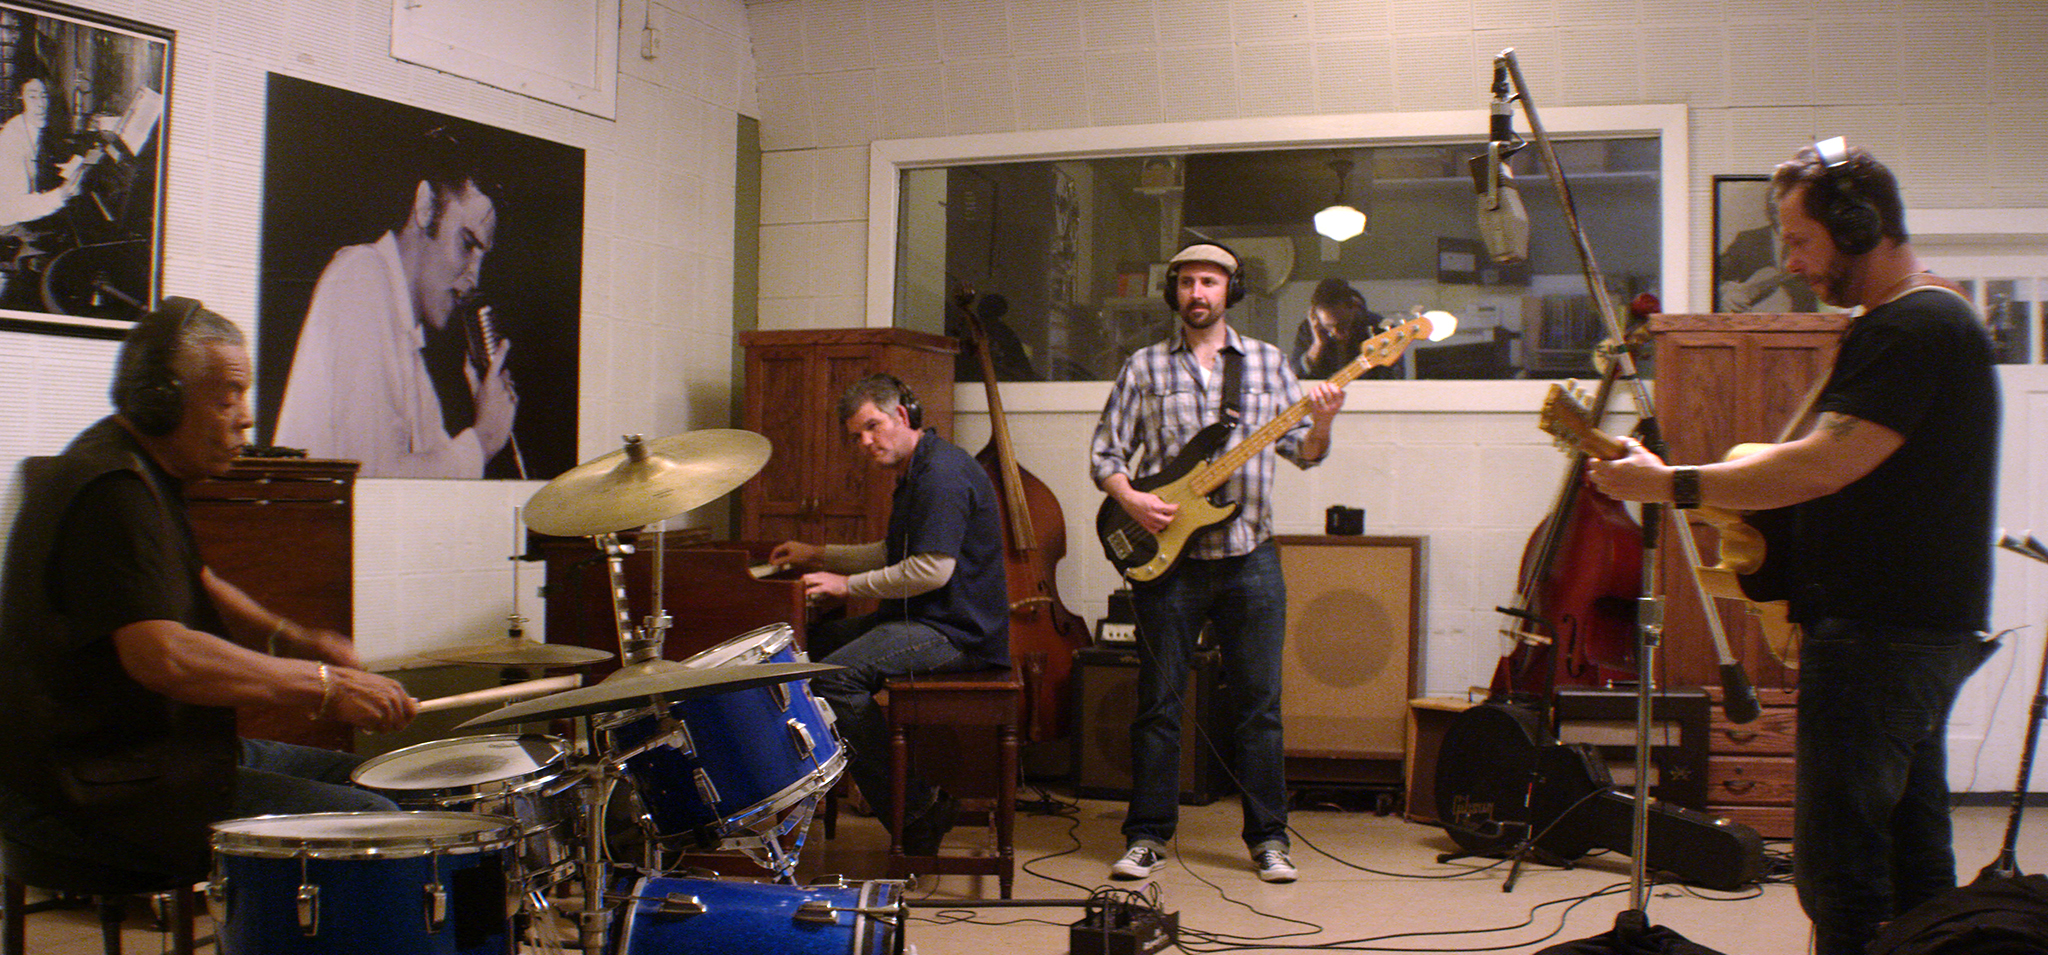 Rory Ledbetter (second from right), an associate professor of voice and acting in the UM Department of Theatre and Film, portrays a bass player at Memphis’ legendary Sun Studio in ‘Son of Sun,’ a short film premiering at the 2020 Nashville Film Festival. Submitted photo